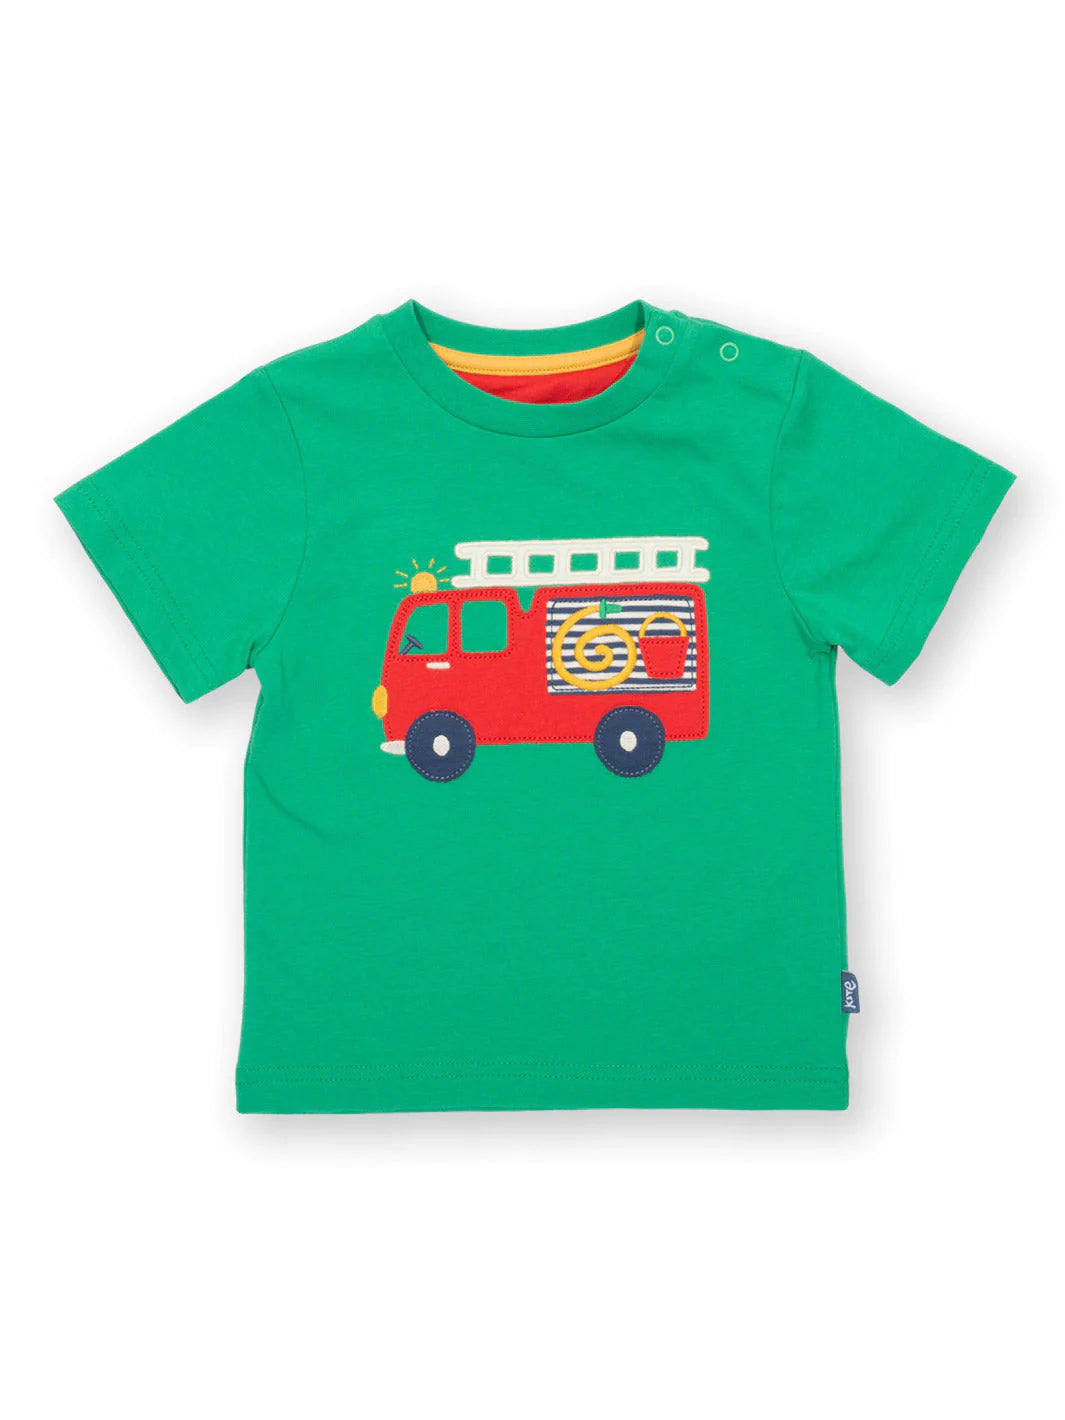 Kite Fire Engine T-Shirt Outfit